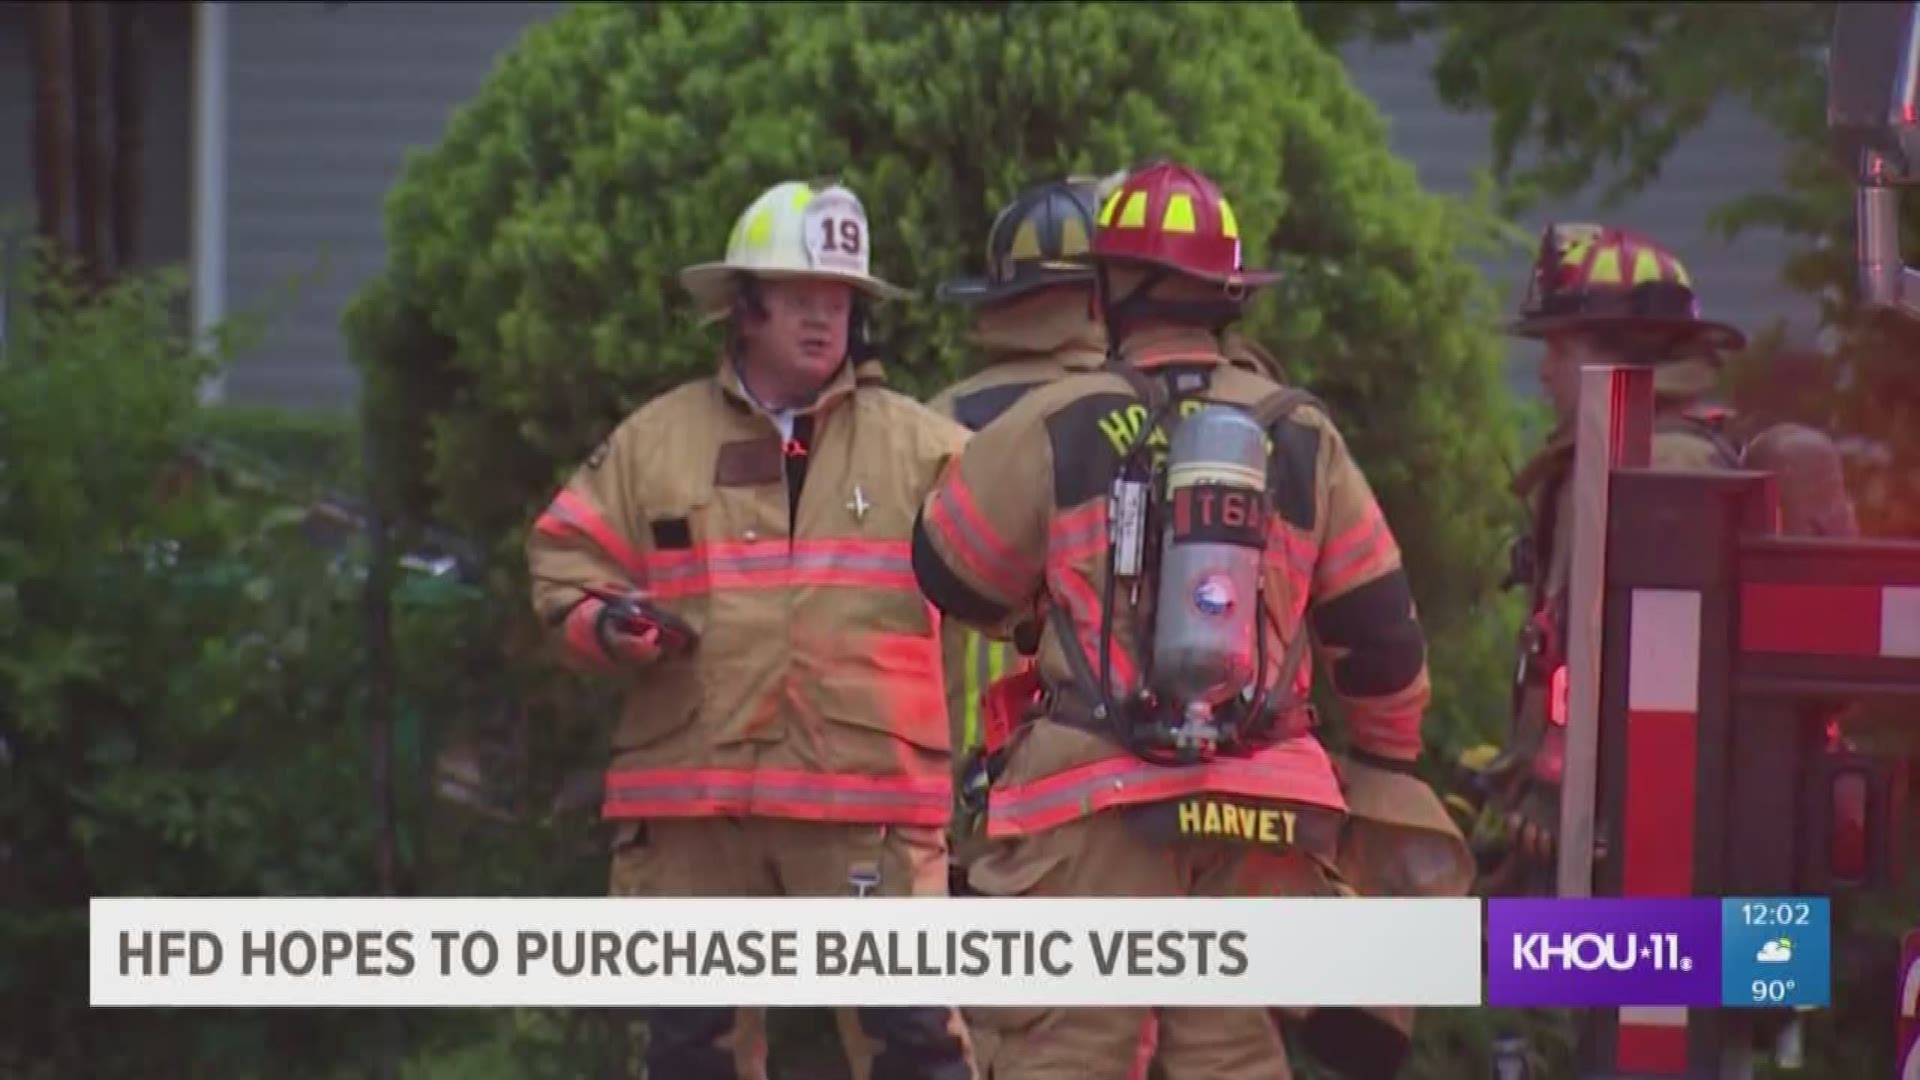 Houston Fire Chief Sam Peña says there is now funding to buy bullet proof vests for Houston firefighters. 